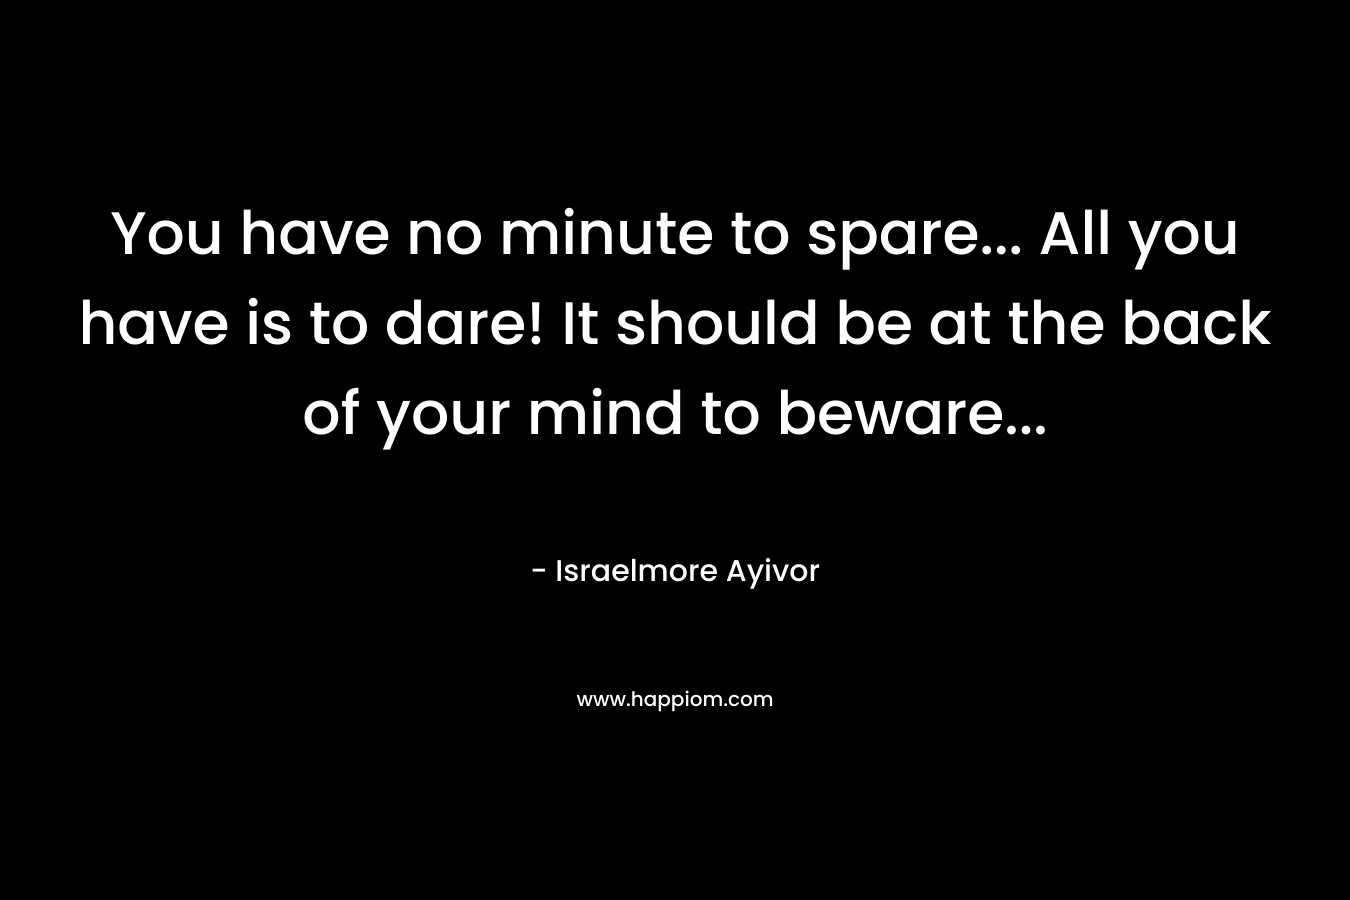 You have no minute to spare… All you have is to dare! It should be at the back of your mind to beware… – Israelmore Ayivor